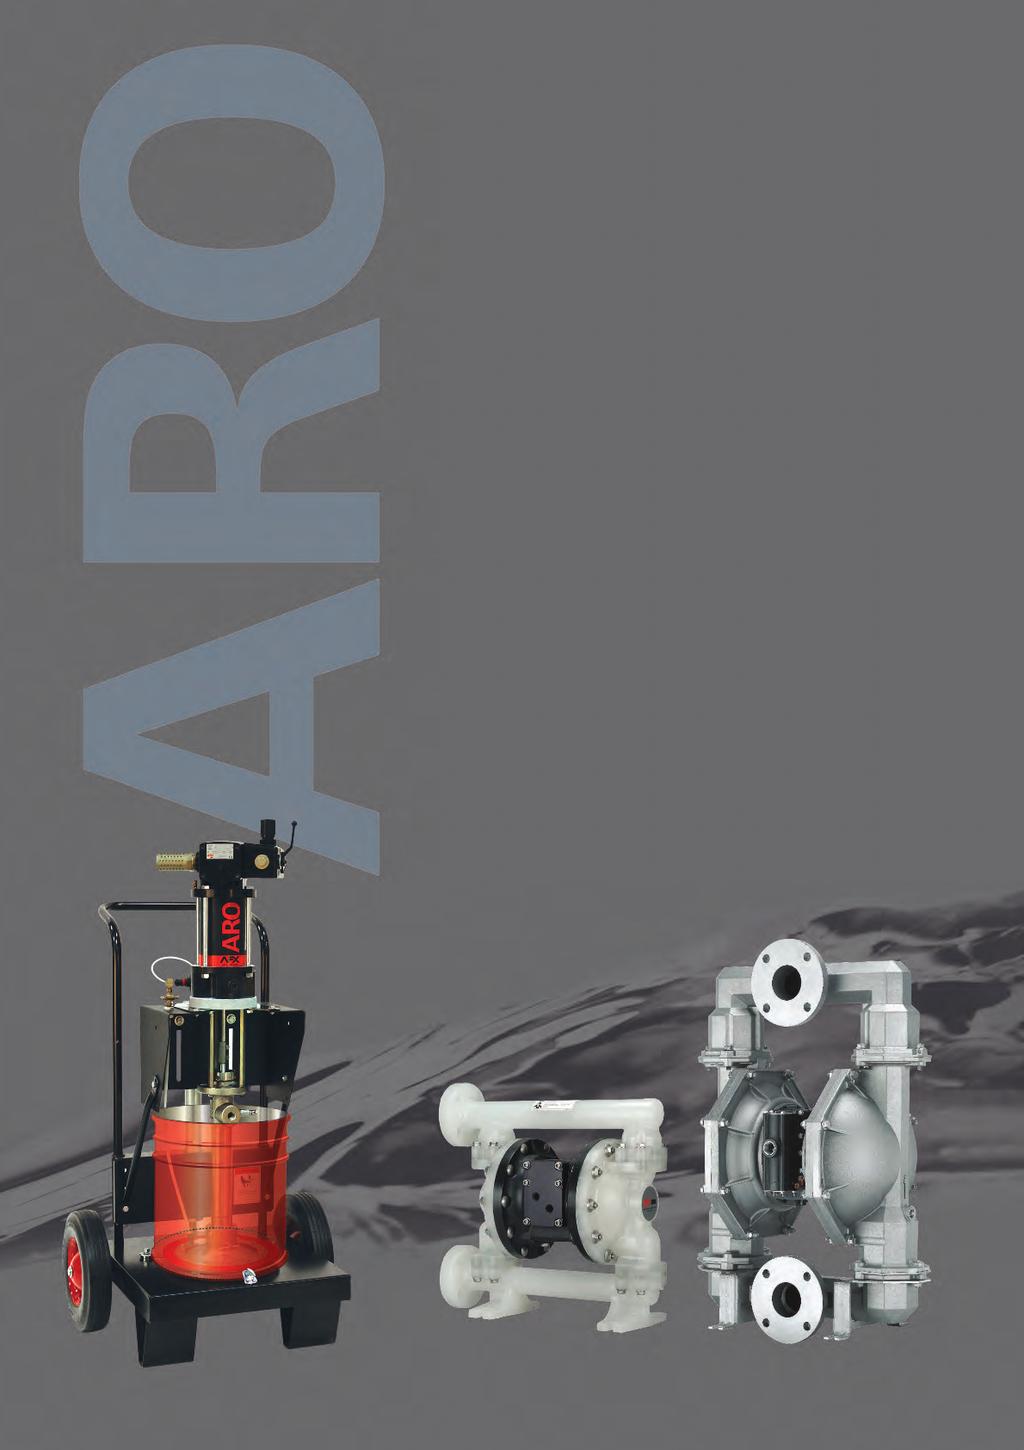 The pump professionals Leader in pneumatic pumps, ARO offers a wide range of diaphragms and piston pumps for low to high viscosity fluids.